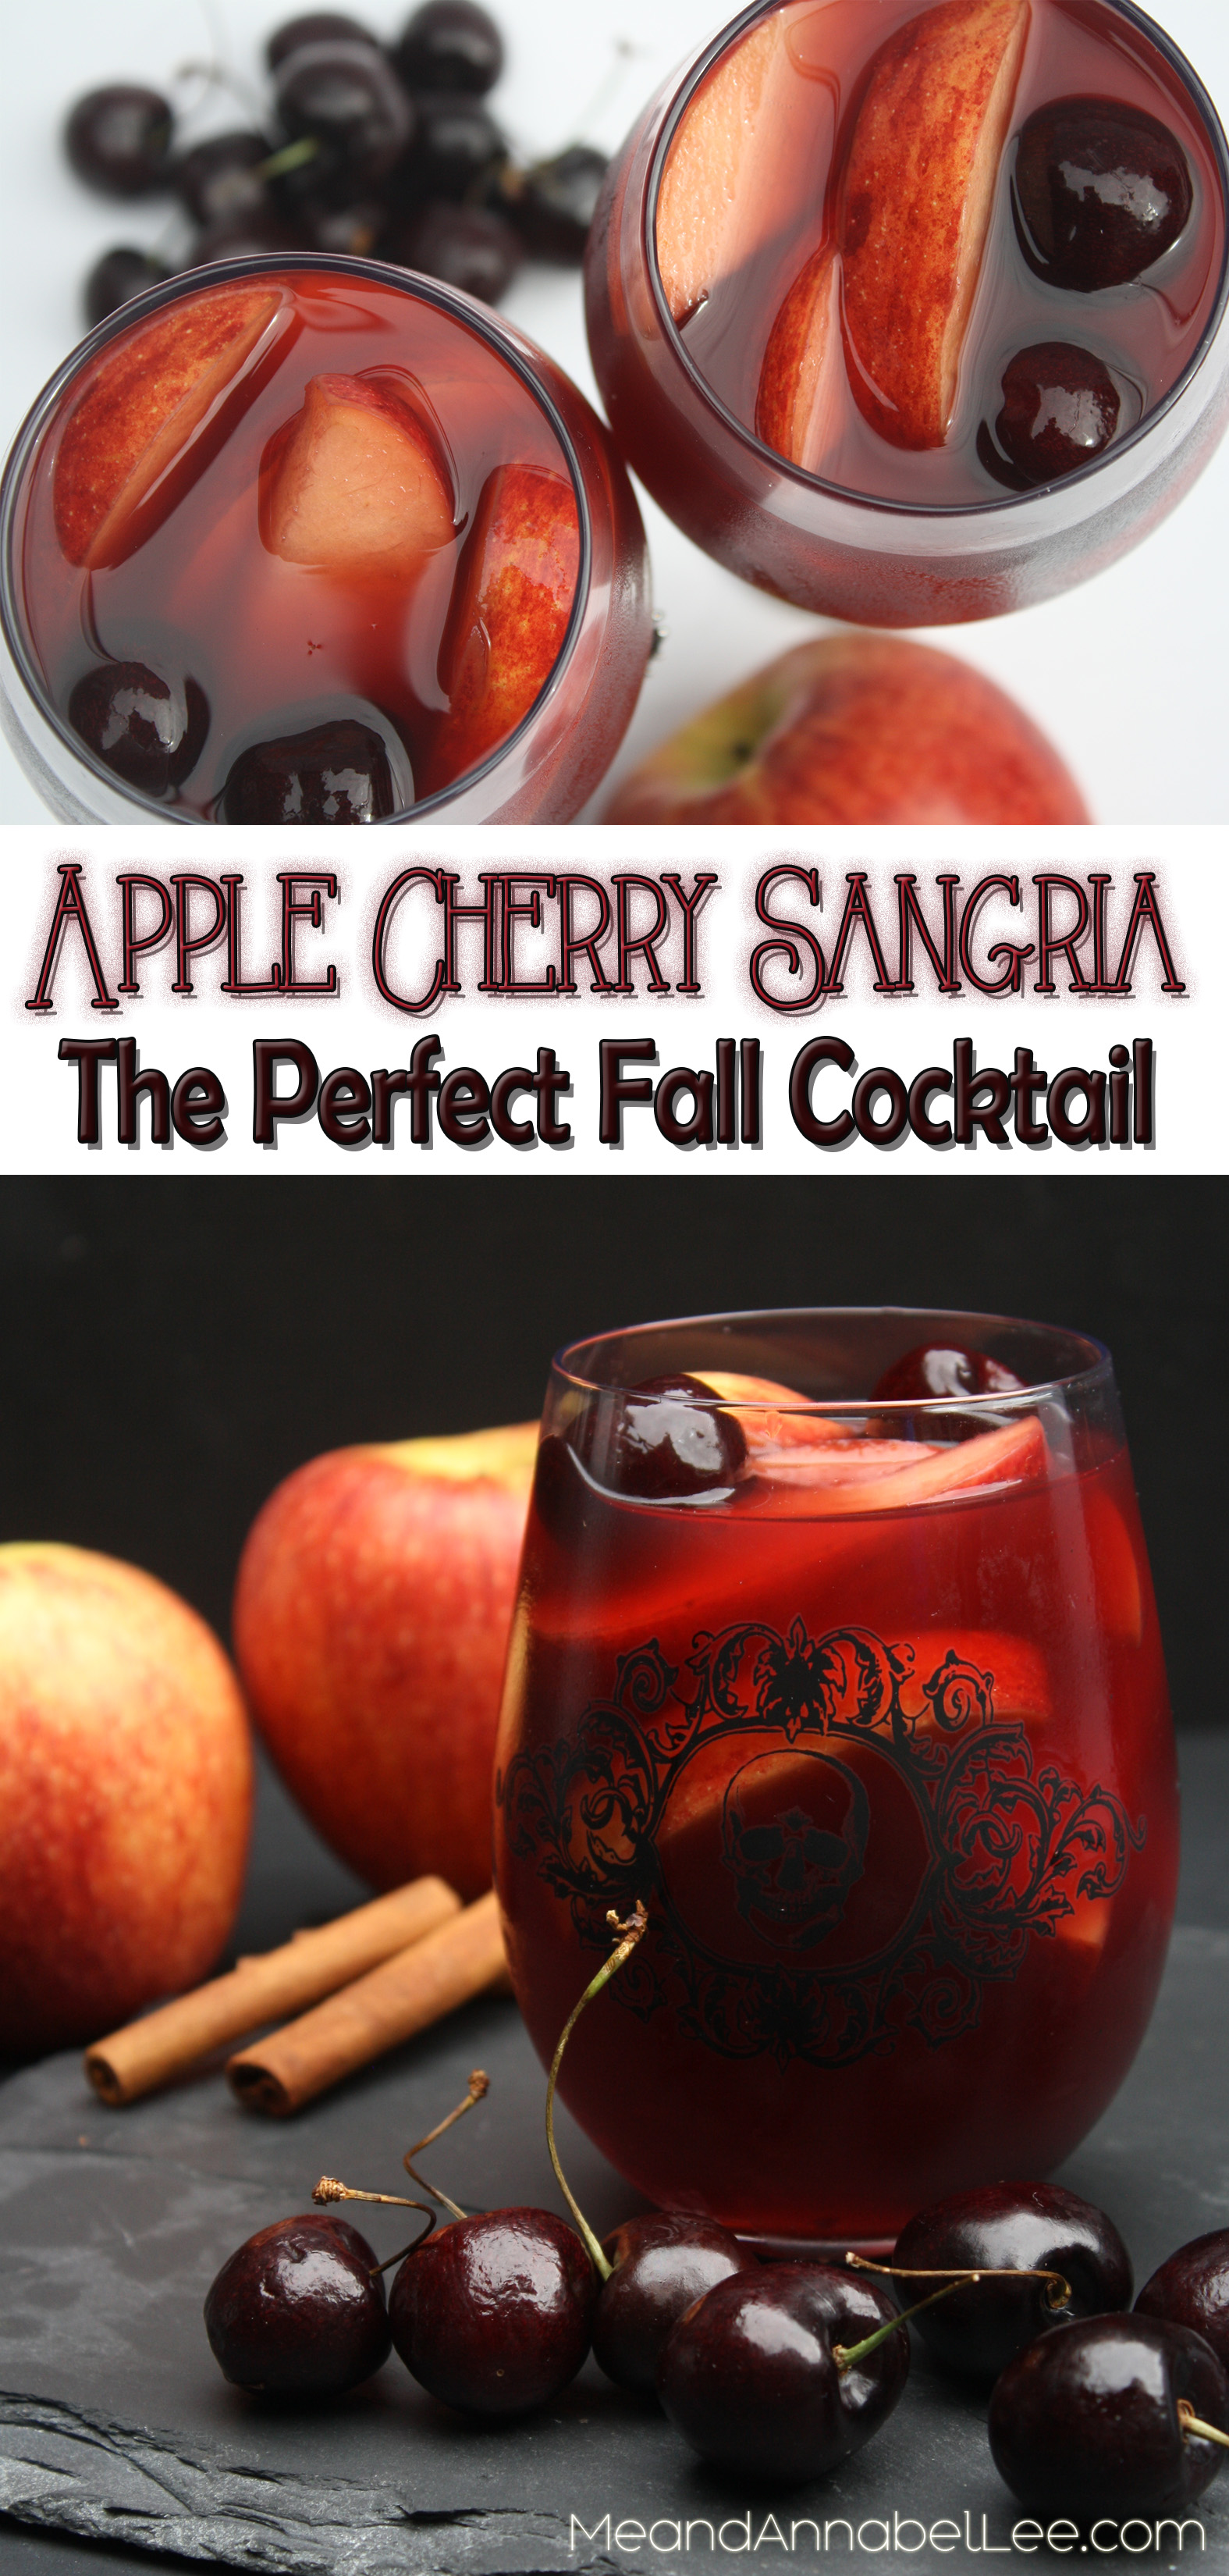 Apple Cherry Sangria....A mix of Envy Apples, Cinnamon, and Cherries make up this Fall inspired cocktail.... perfect for Halloween, Thanksgiving, or a Fall Party! - www.MeandAnnabelLee.com